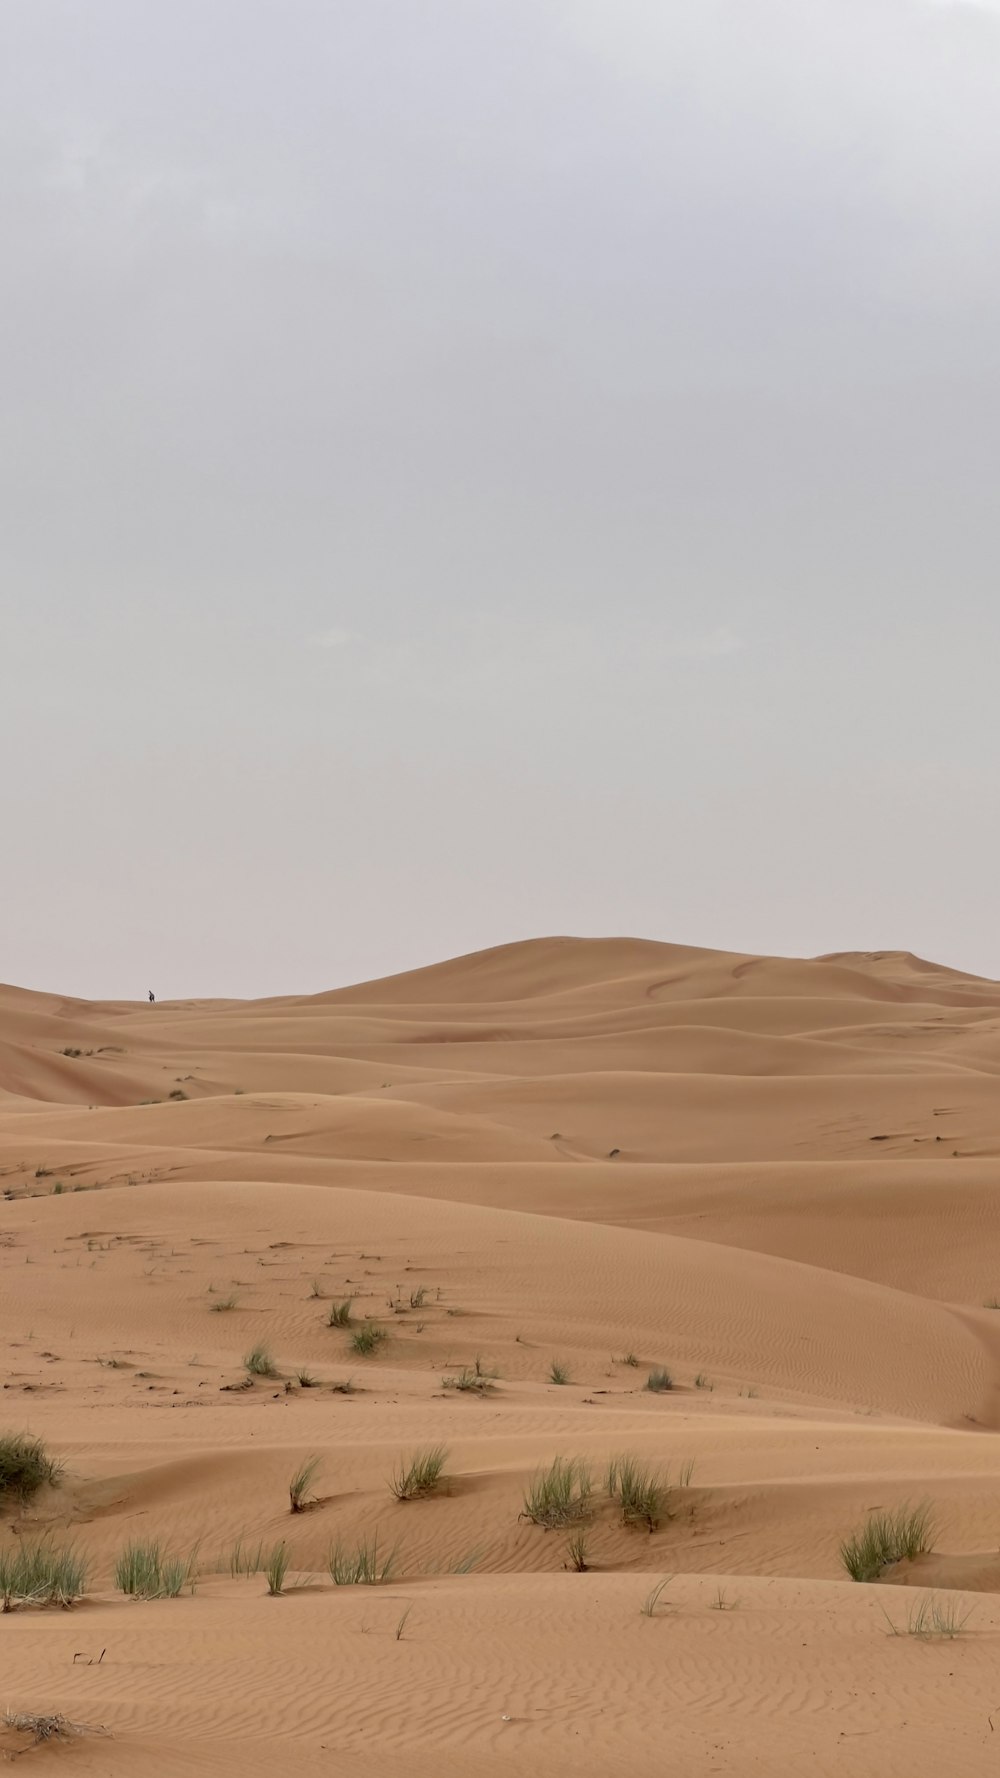 a lone giraffe standing in the middle of a desert